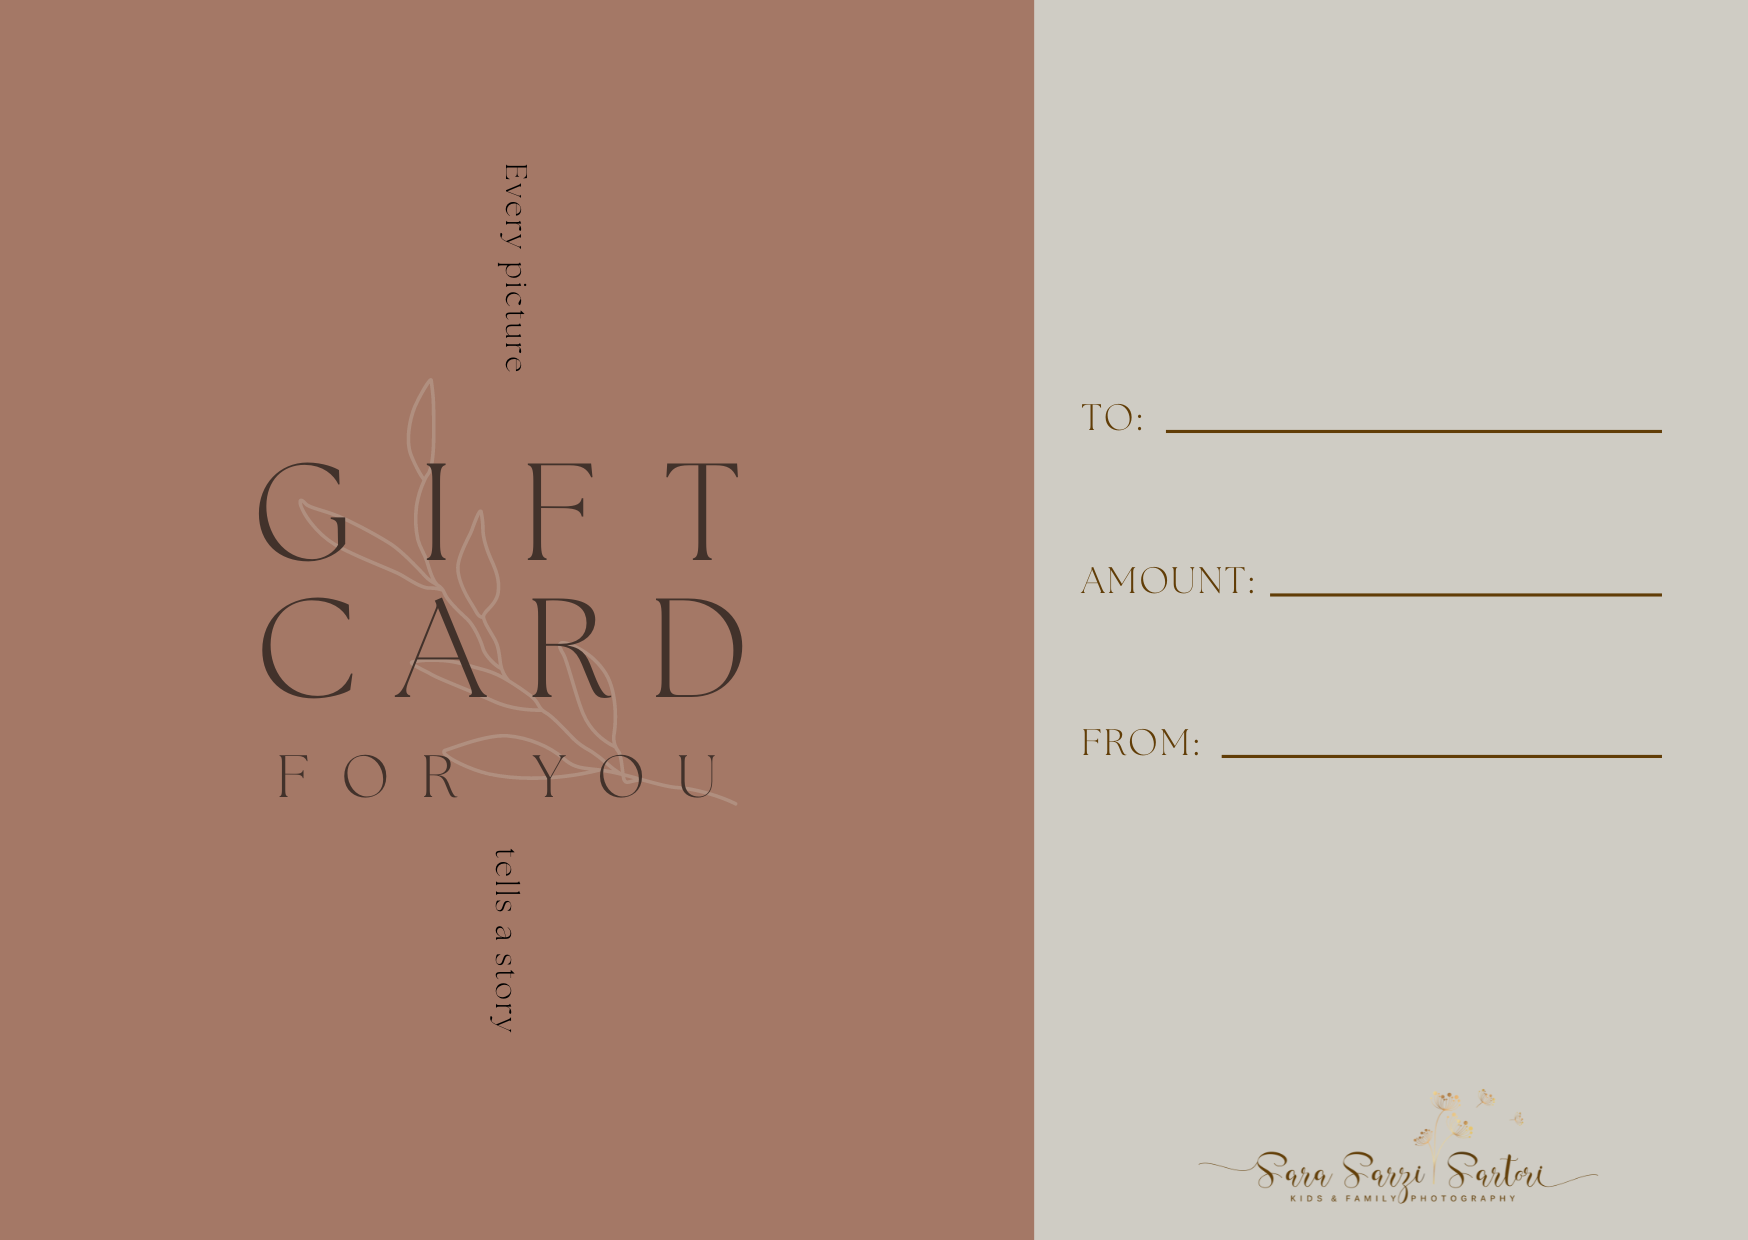 Gift card for a photoshooting. Family, Kids, pregnancy photoshooting in Luzern, Zug and Bern area